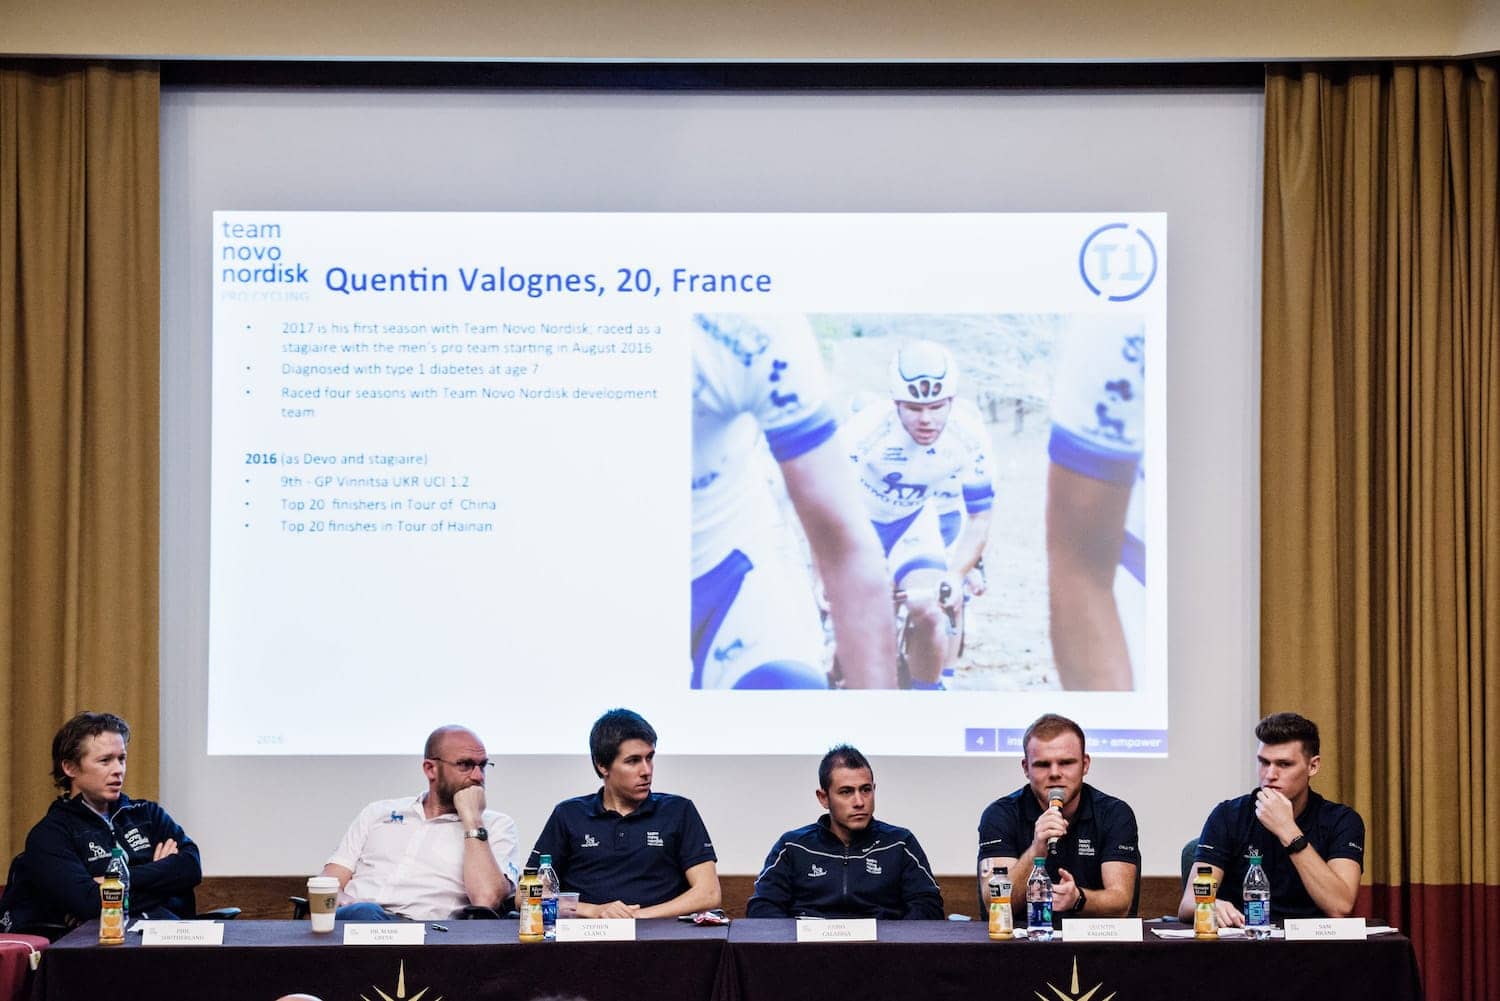 Panel of Team Novo Nordisk cyclists with Quentin speaking into a microphone